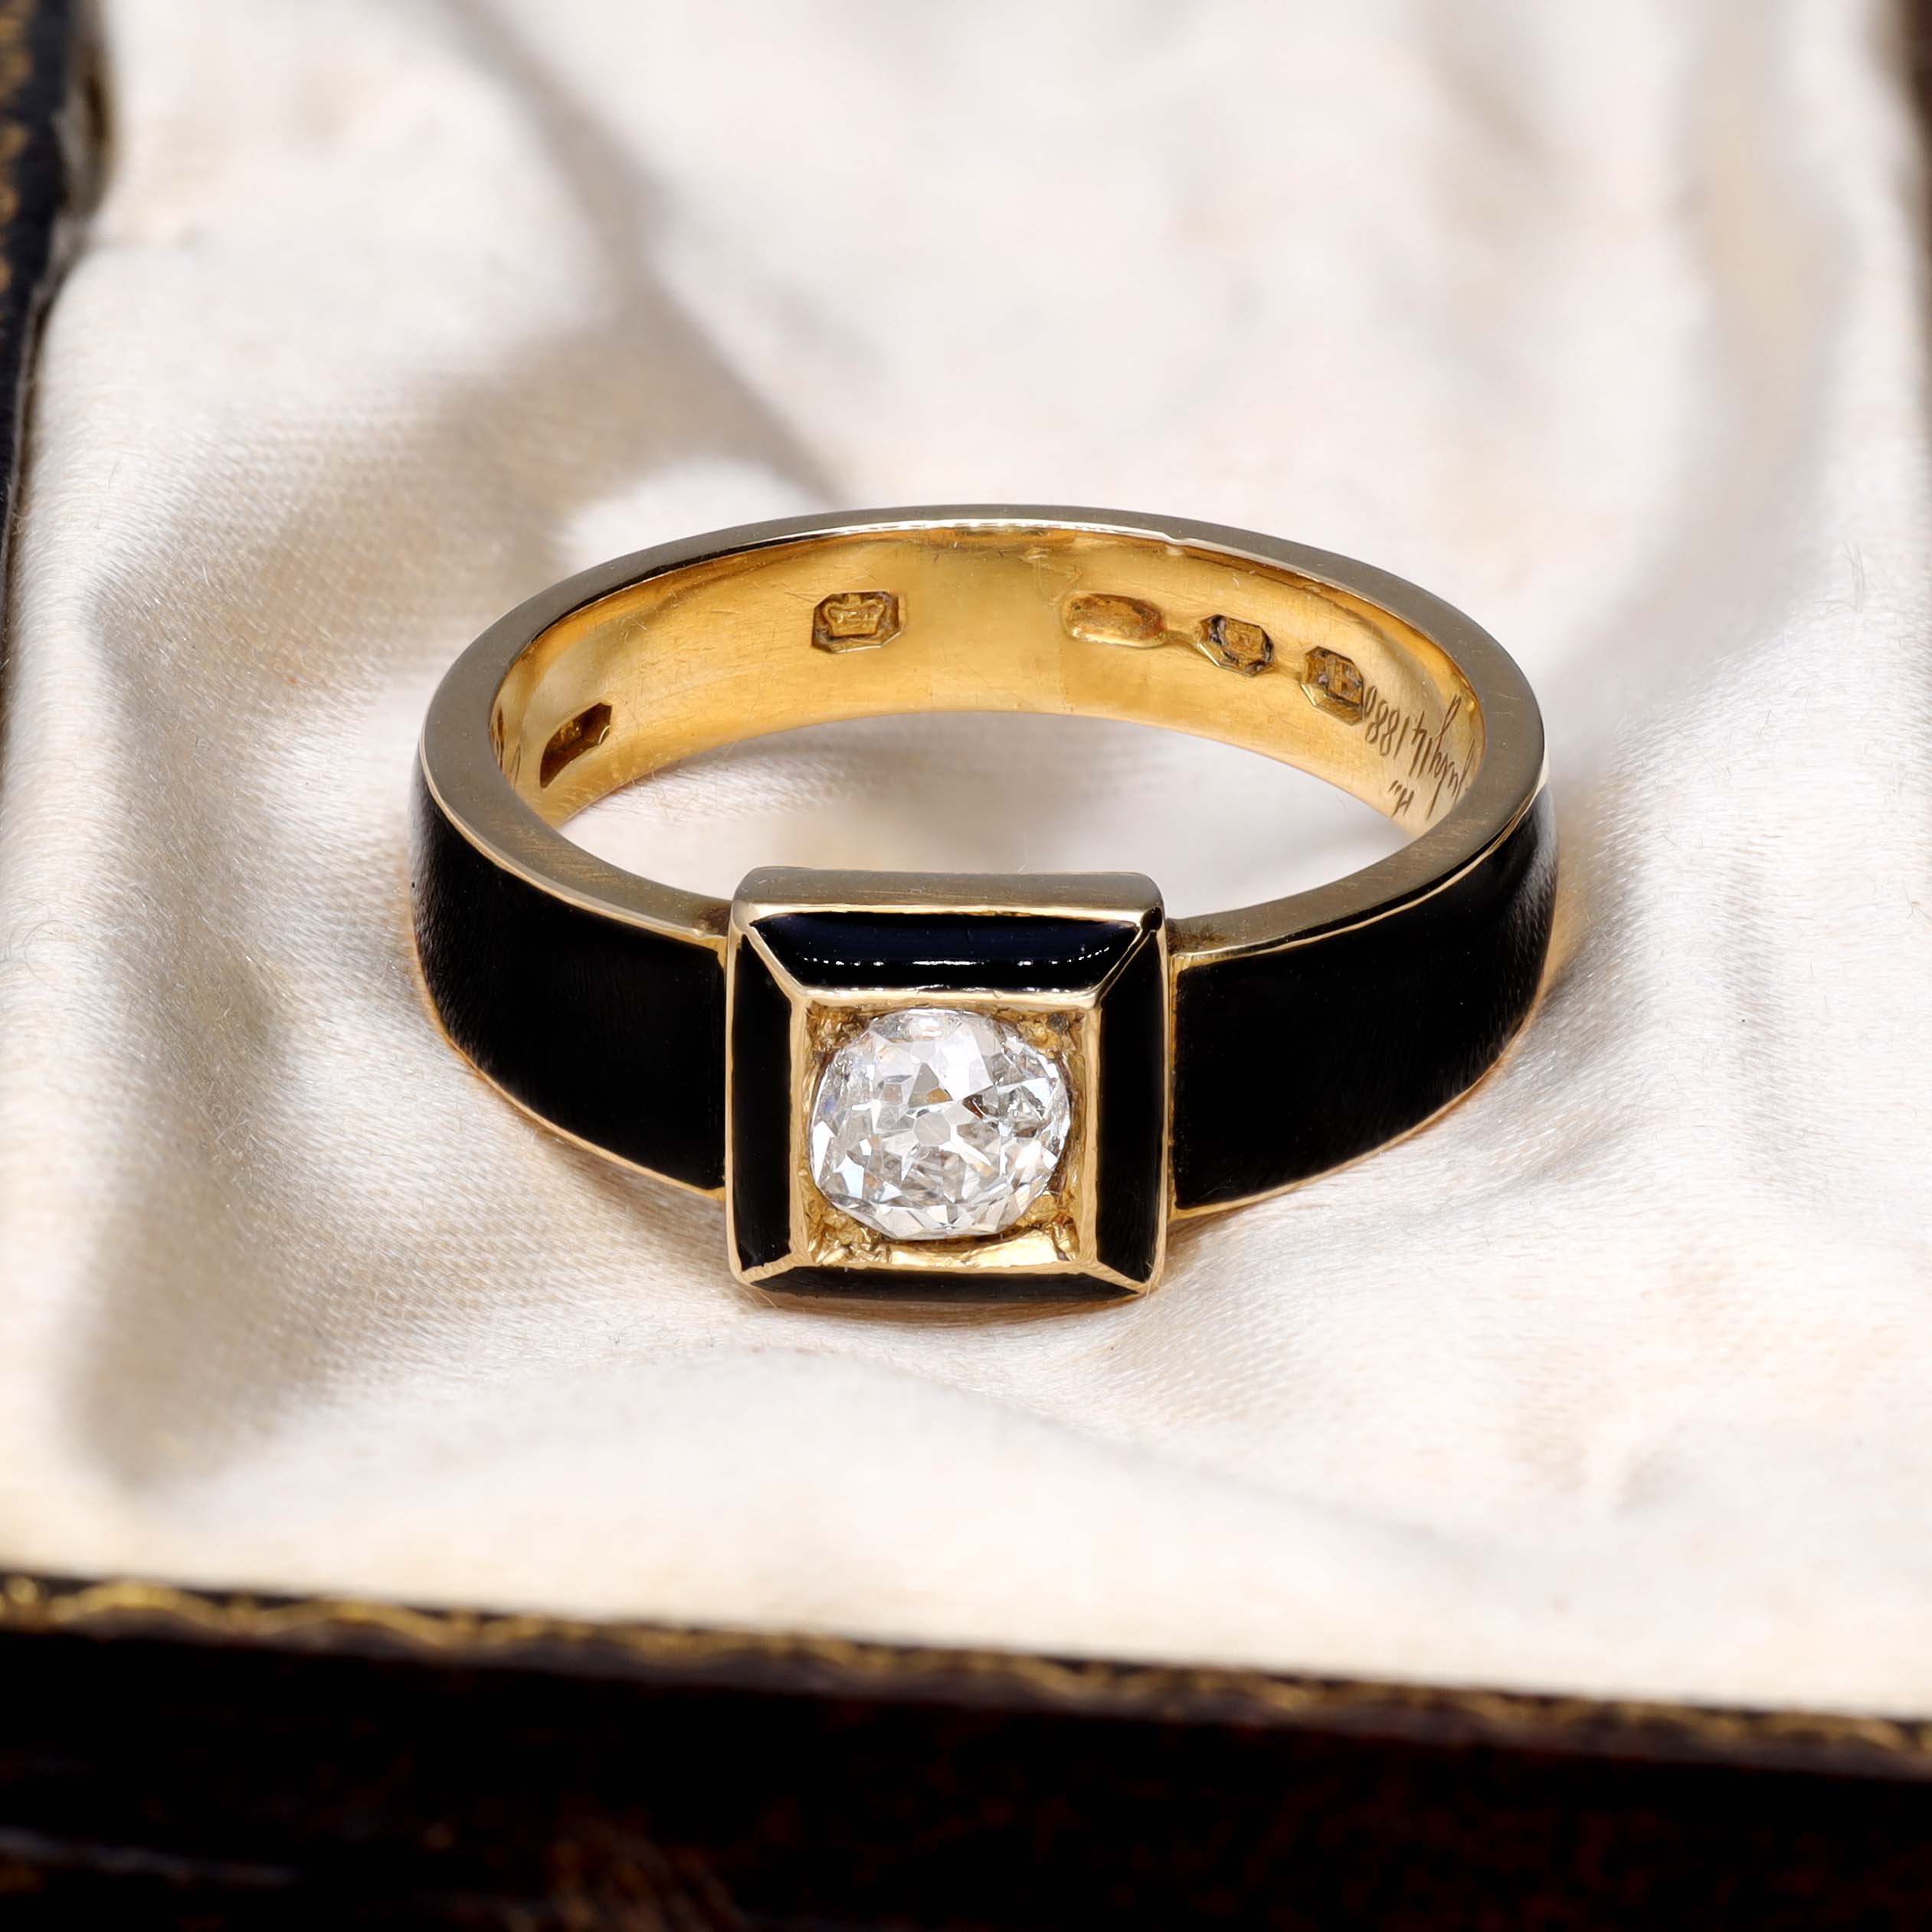 The Antique Black Enamel and Cushion Cut Diamond Mourning Ring - Antique Jewellers